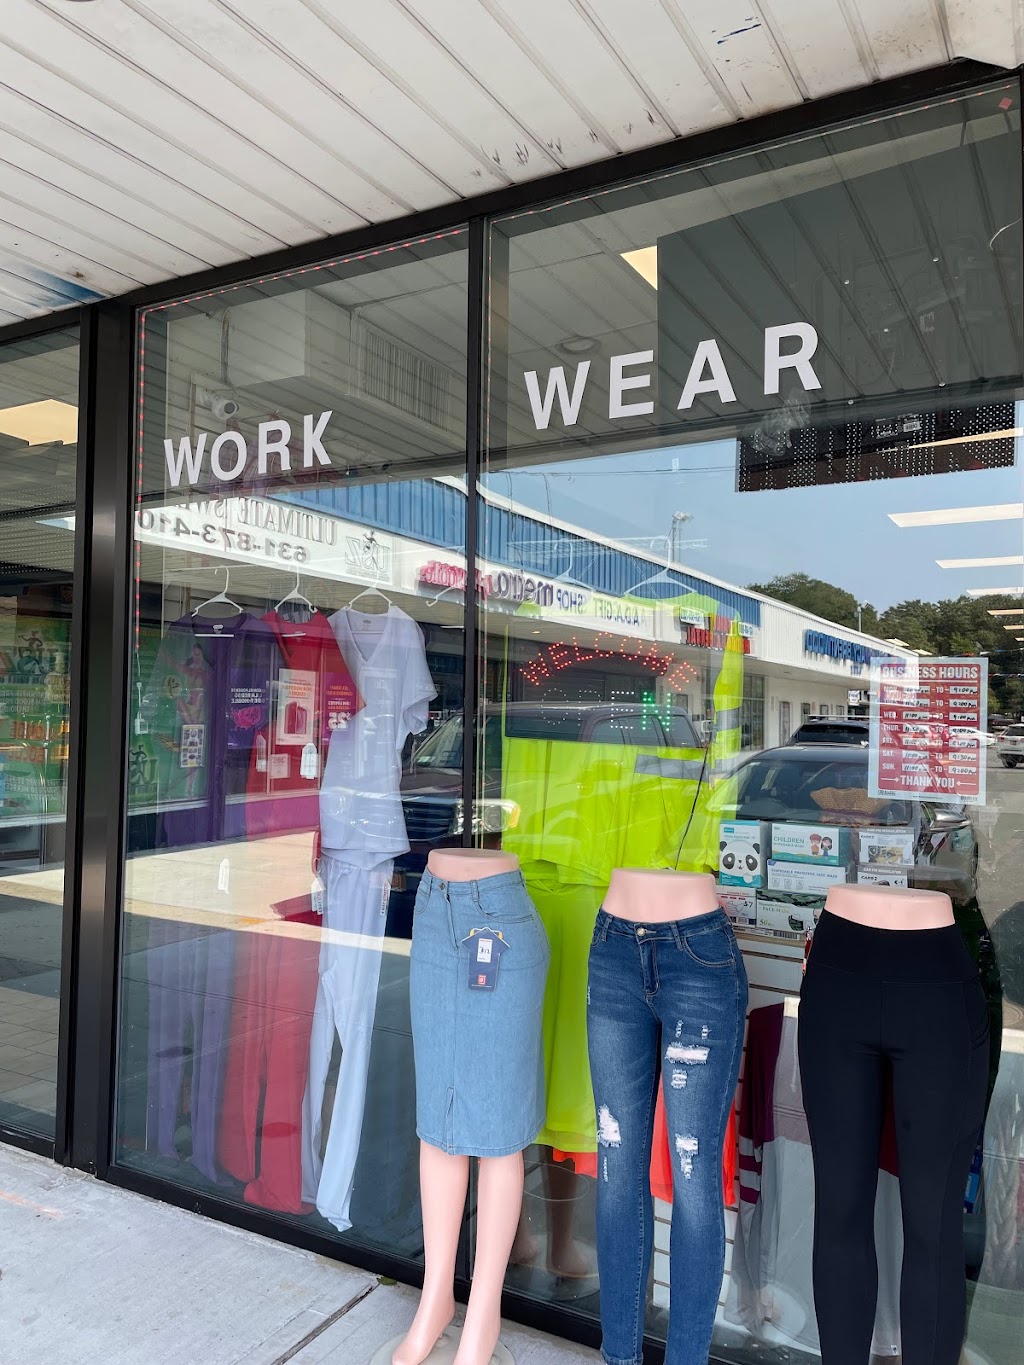 Work Wear | 741 Commack Rd, Brentwood, NY 11717 | Phone: (631) 446-3080